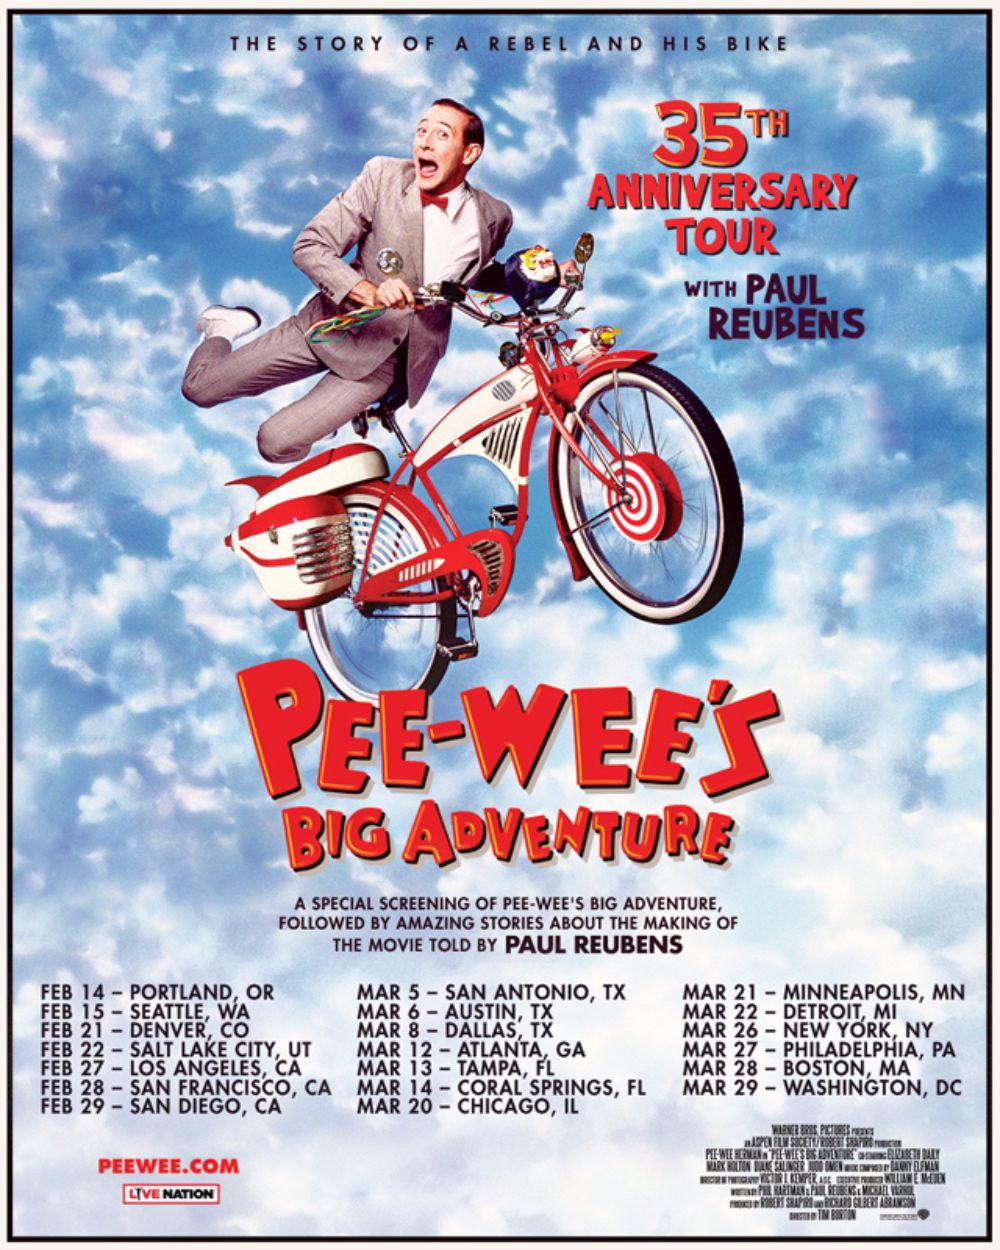 Pee-wee's Big Adventure 35th Anniversary Tour poster